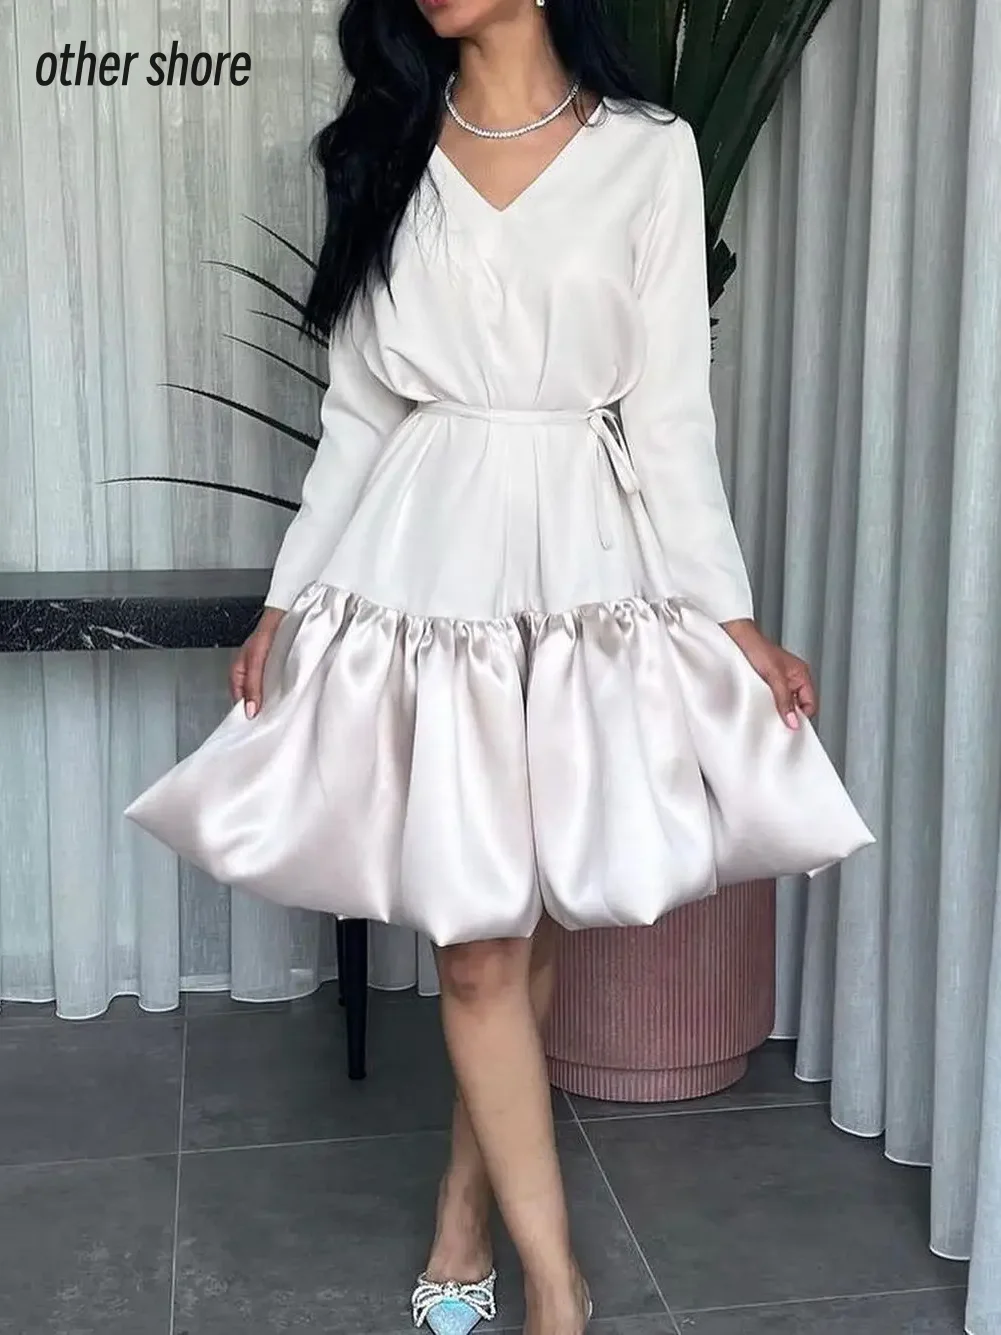 

Other Shore Elegant Vintage Sweet Simple Ivory Ruffle Short A-Line Customize Formal Occasion Prom Dress Evening Party Gowns